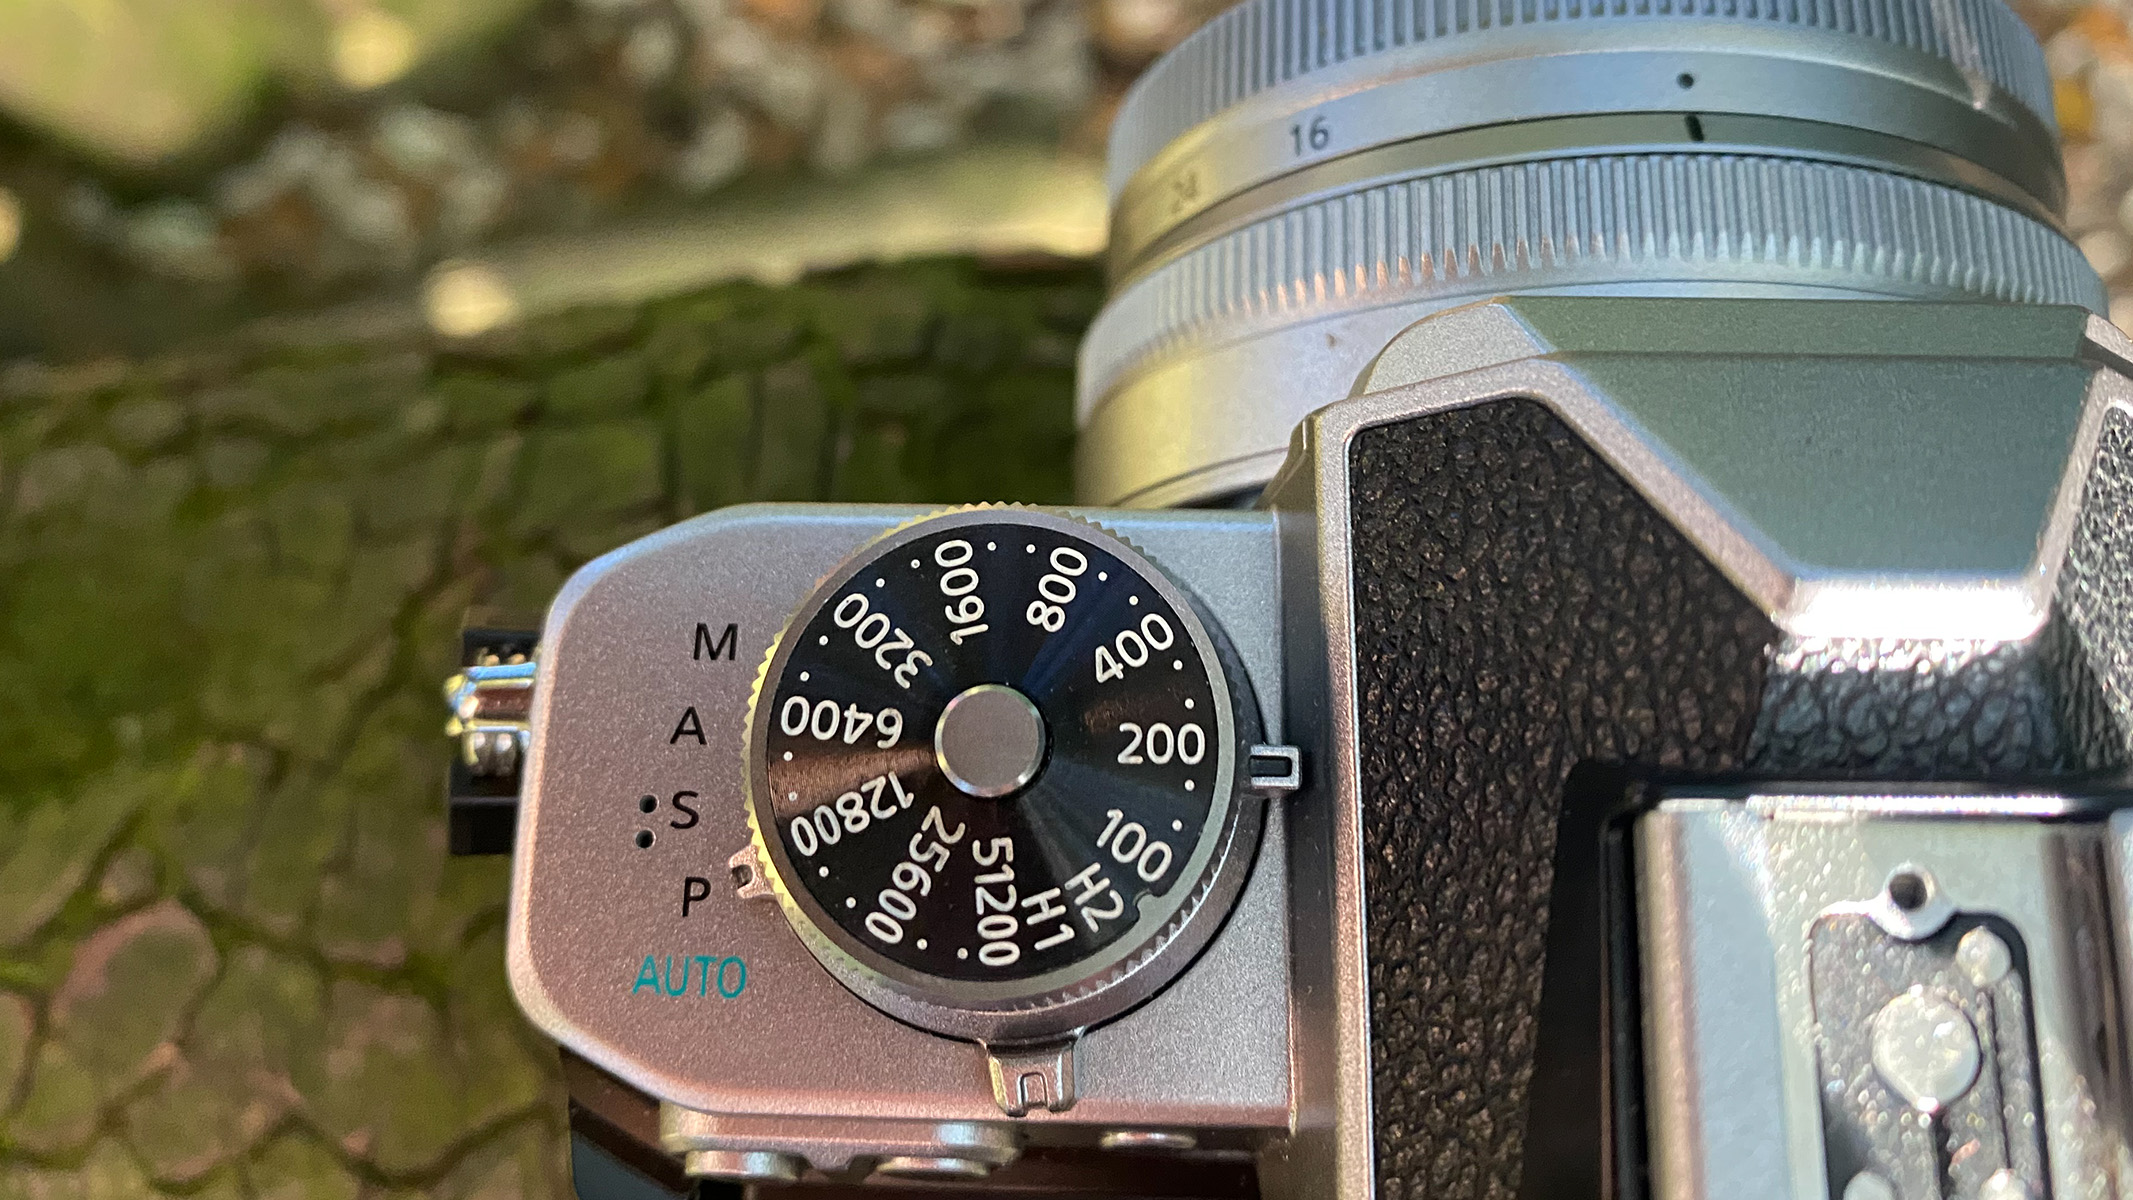 Image shows the ISO control on the top left of the camera